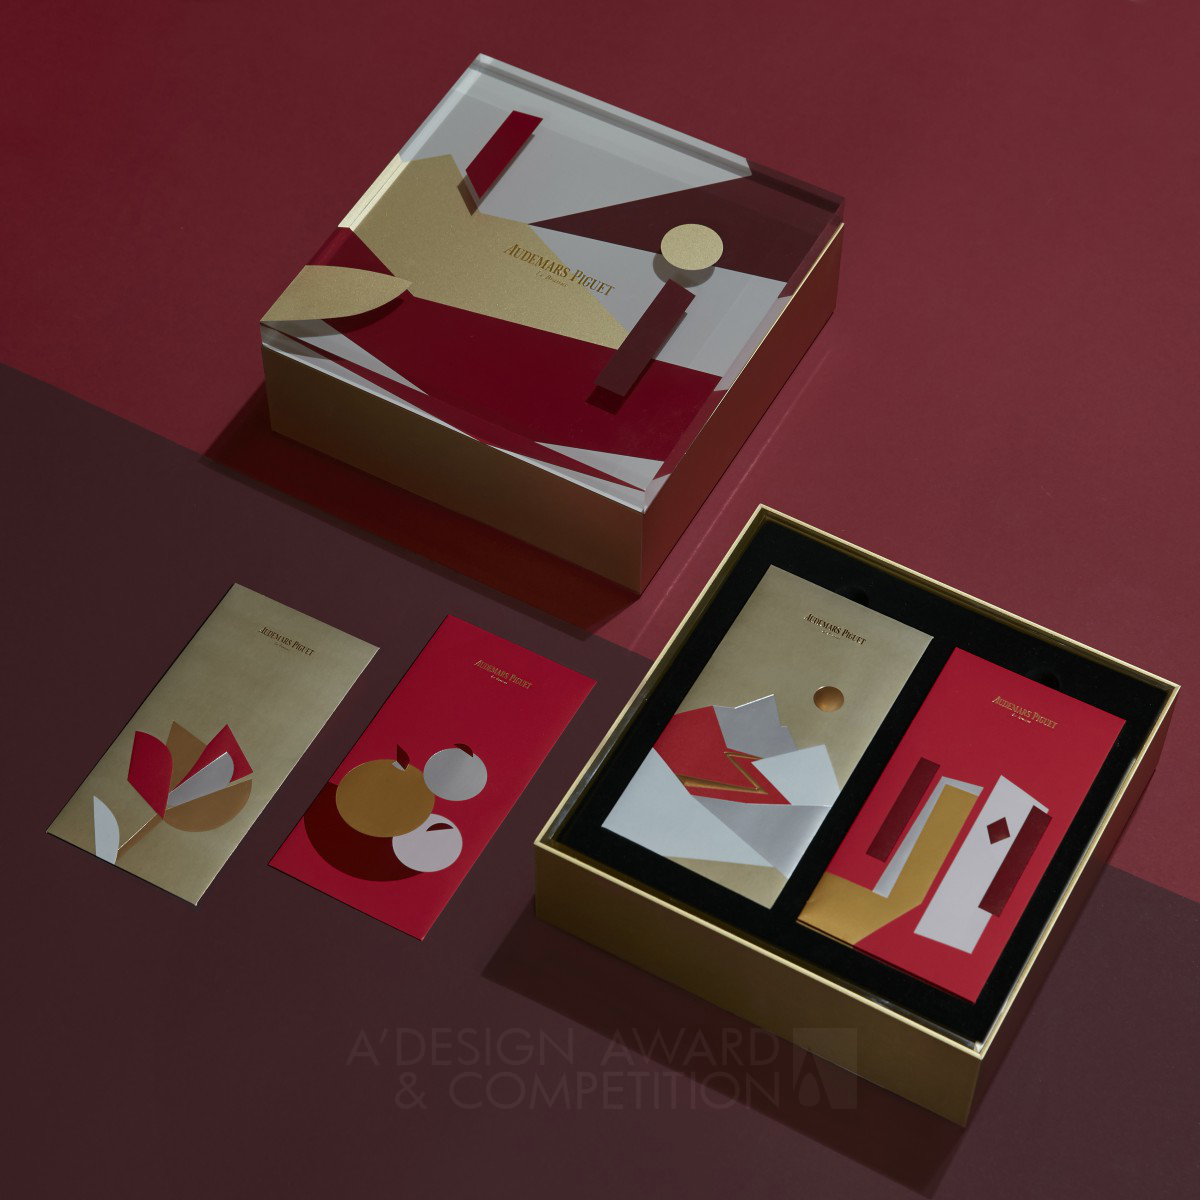 Audemars Piguet X Art X Chinese New Year <b>Red pockets and gifting design